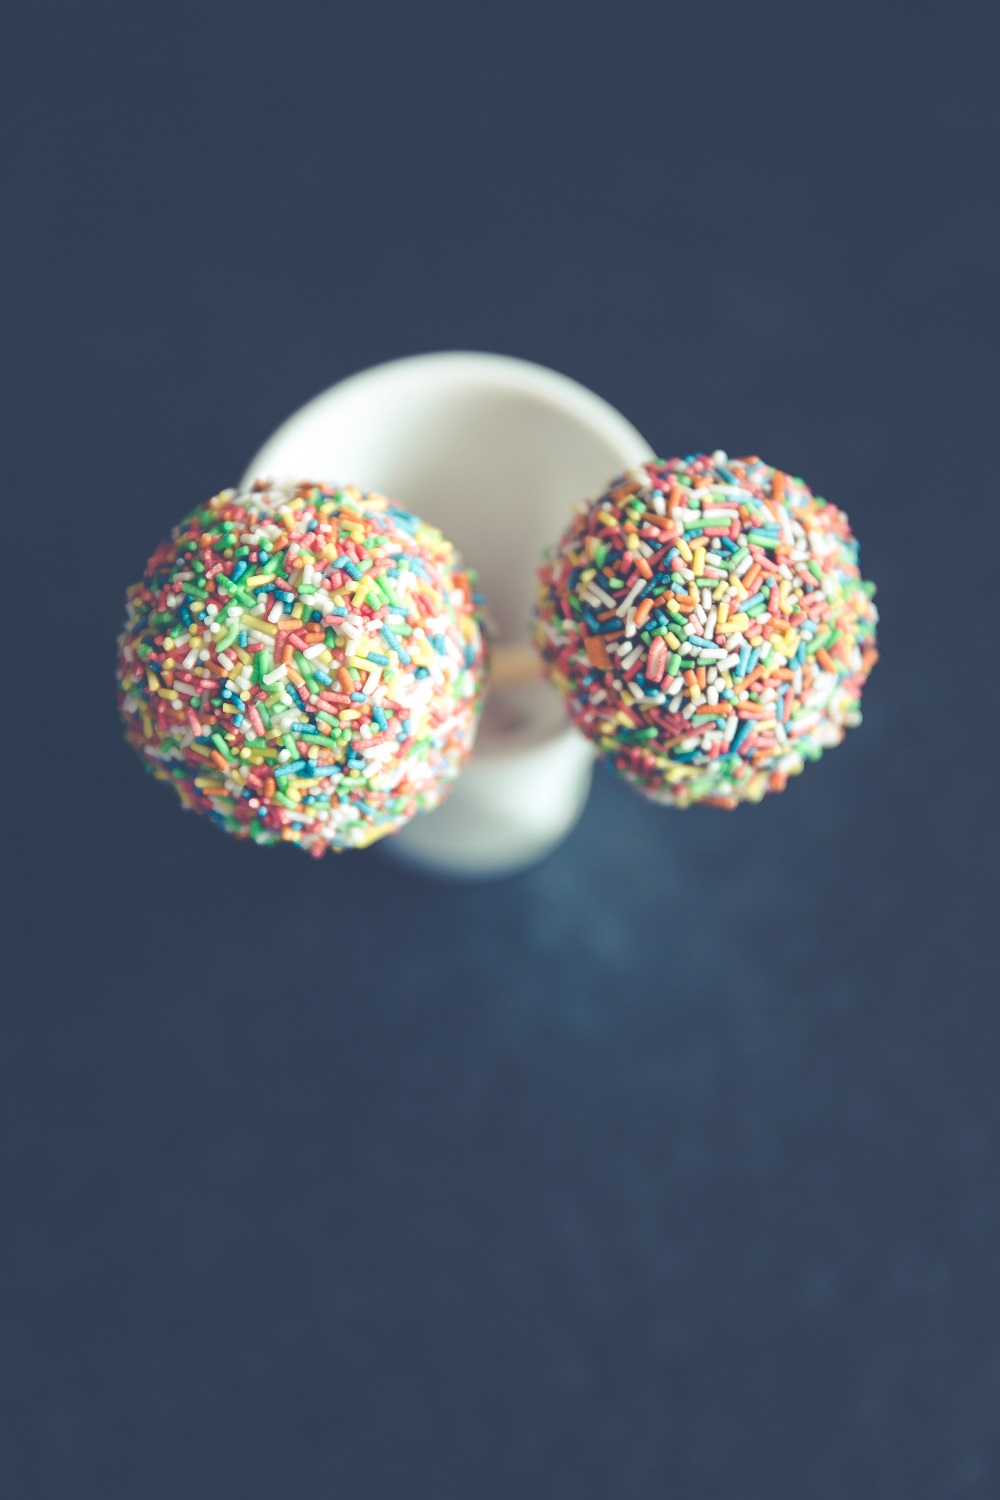 Pop cakes from above